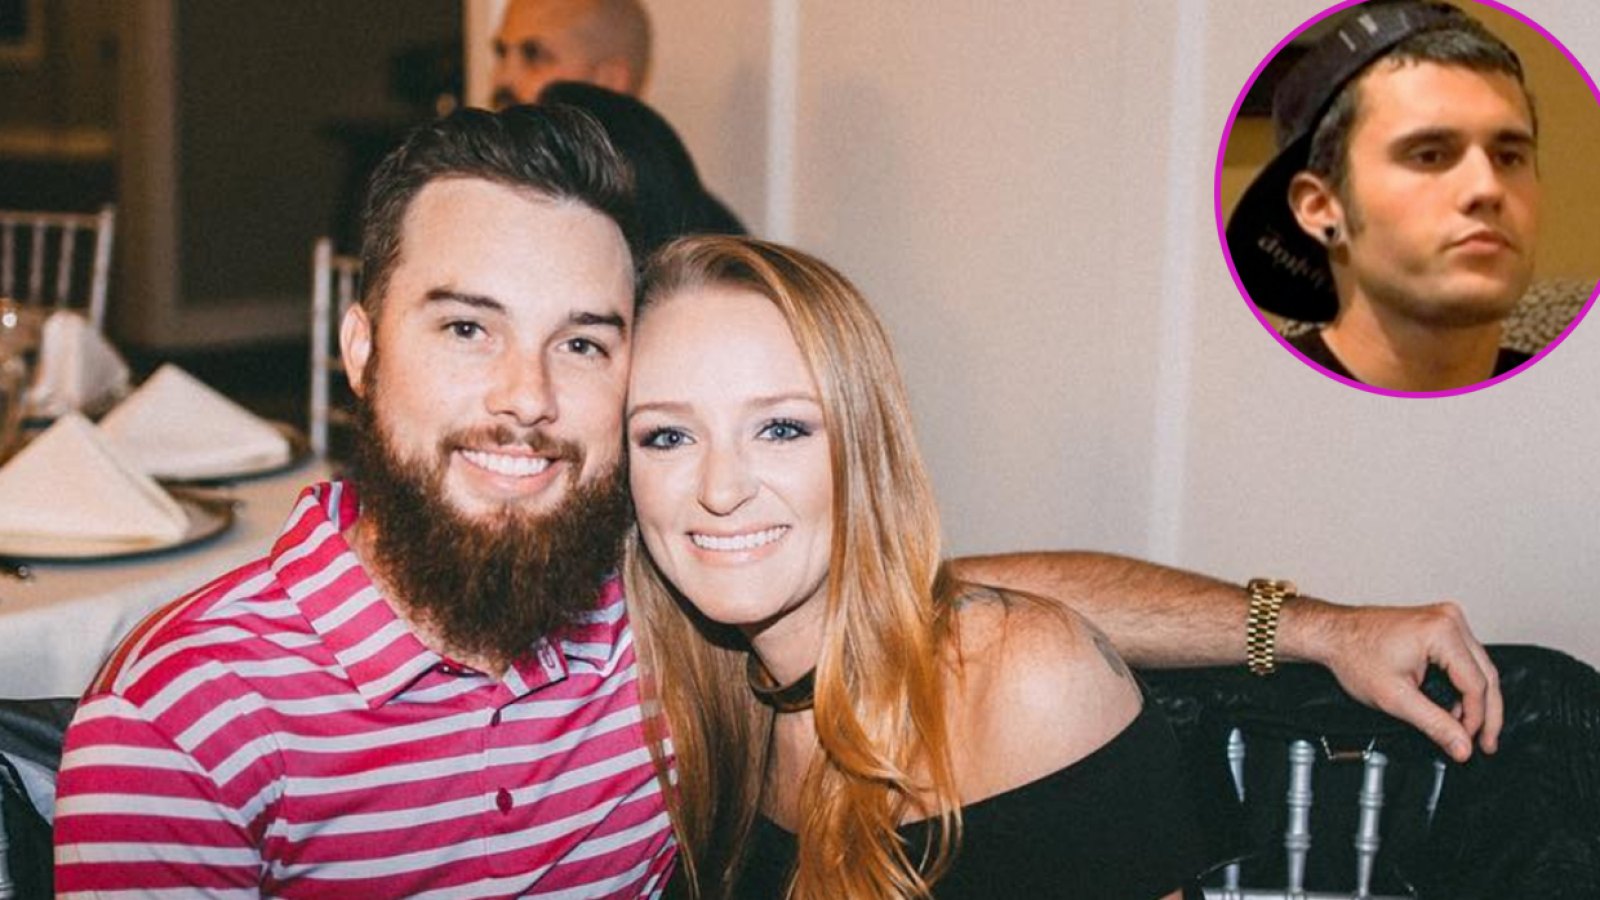 Maci Bookout’s Husband Taylor McKinney Claims Ryan Edwards Threatened to ‘Put a Bullet’ in His Head